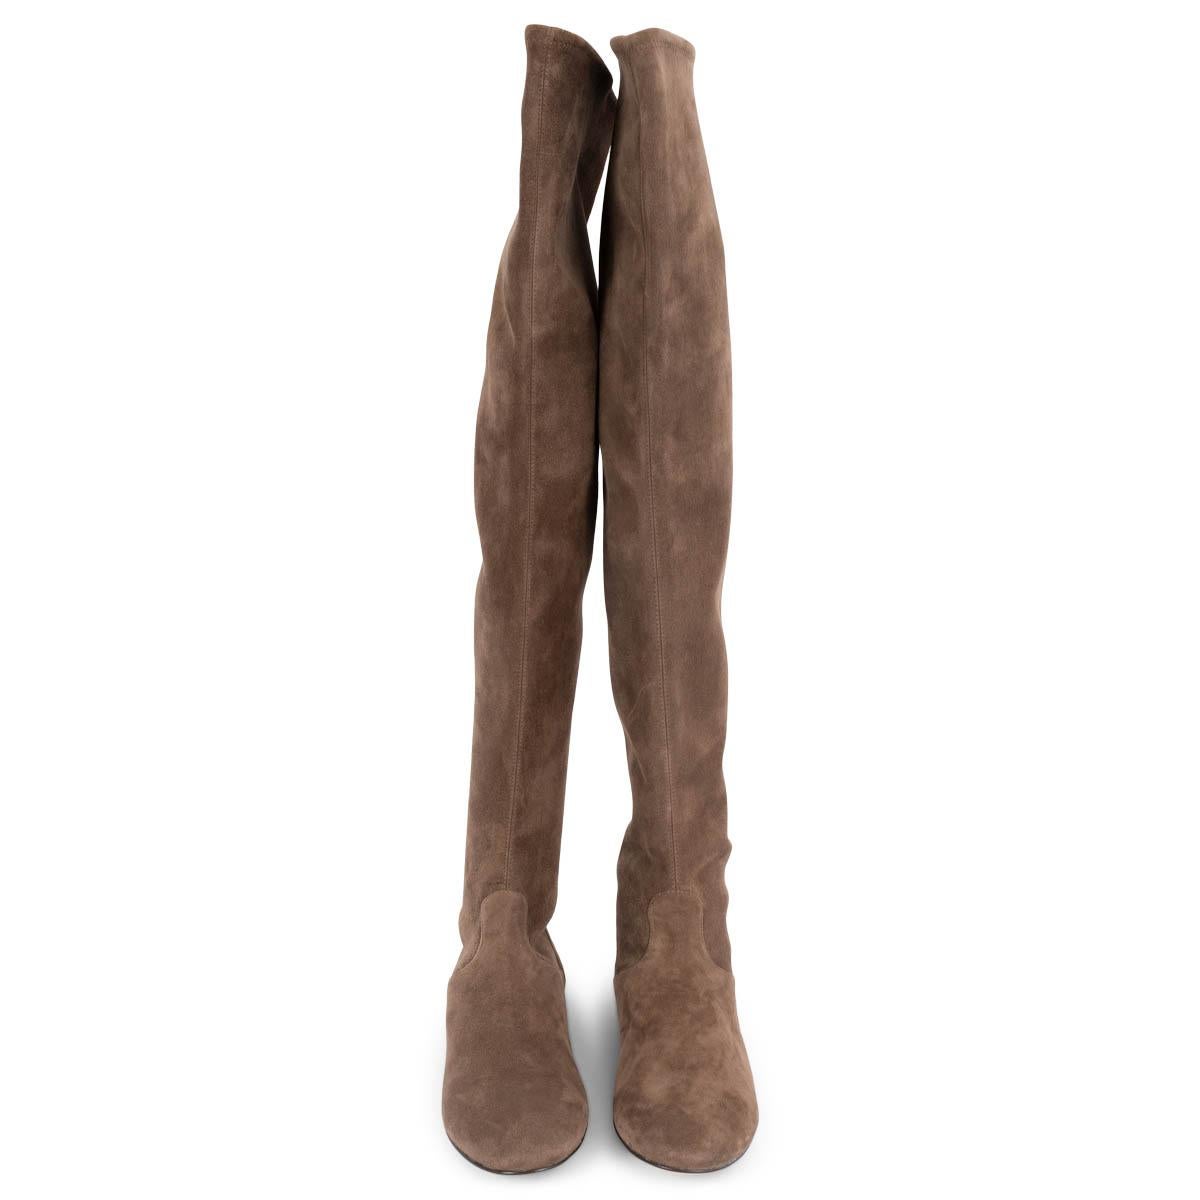 100% authentic Gianvito Rossi flat over knee boots in brown stretchy suede. Brand new.

Measurements
Imprinted Size	38.5
Shoe Size	38.5
Inside Sole	25.5cm (9.9in)
Width	7.5cm (2.9in)
Heel	1cm (0.4in)
Shaft	57cm (22.2in)
Top Circumference	38cm